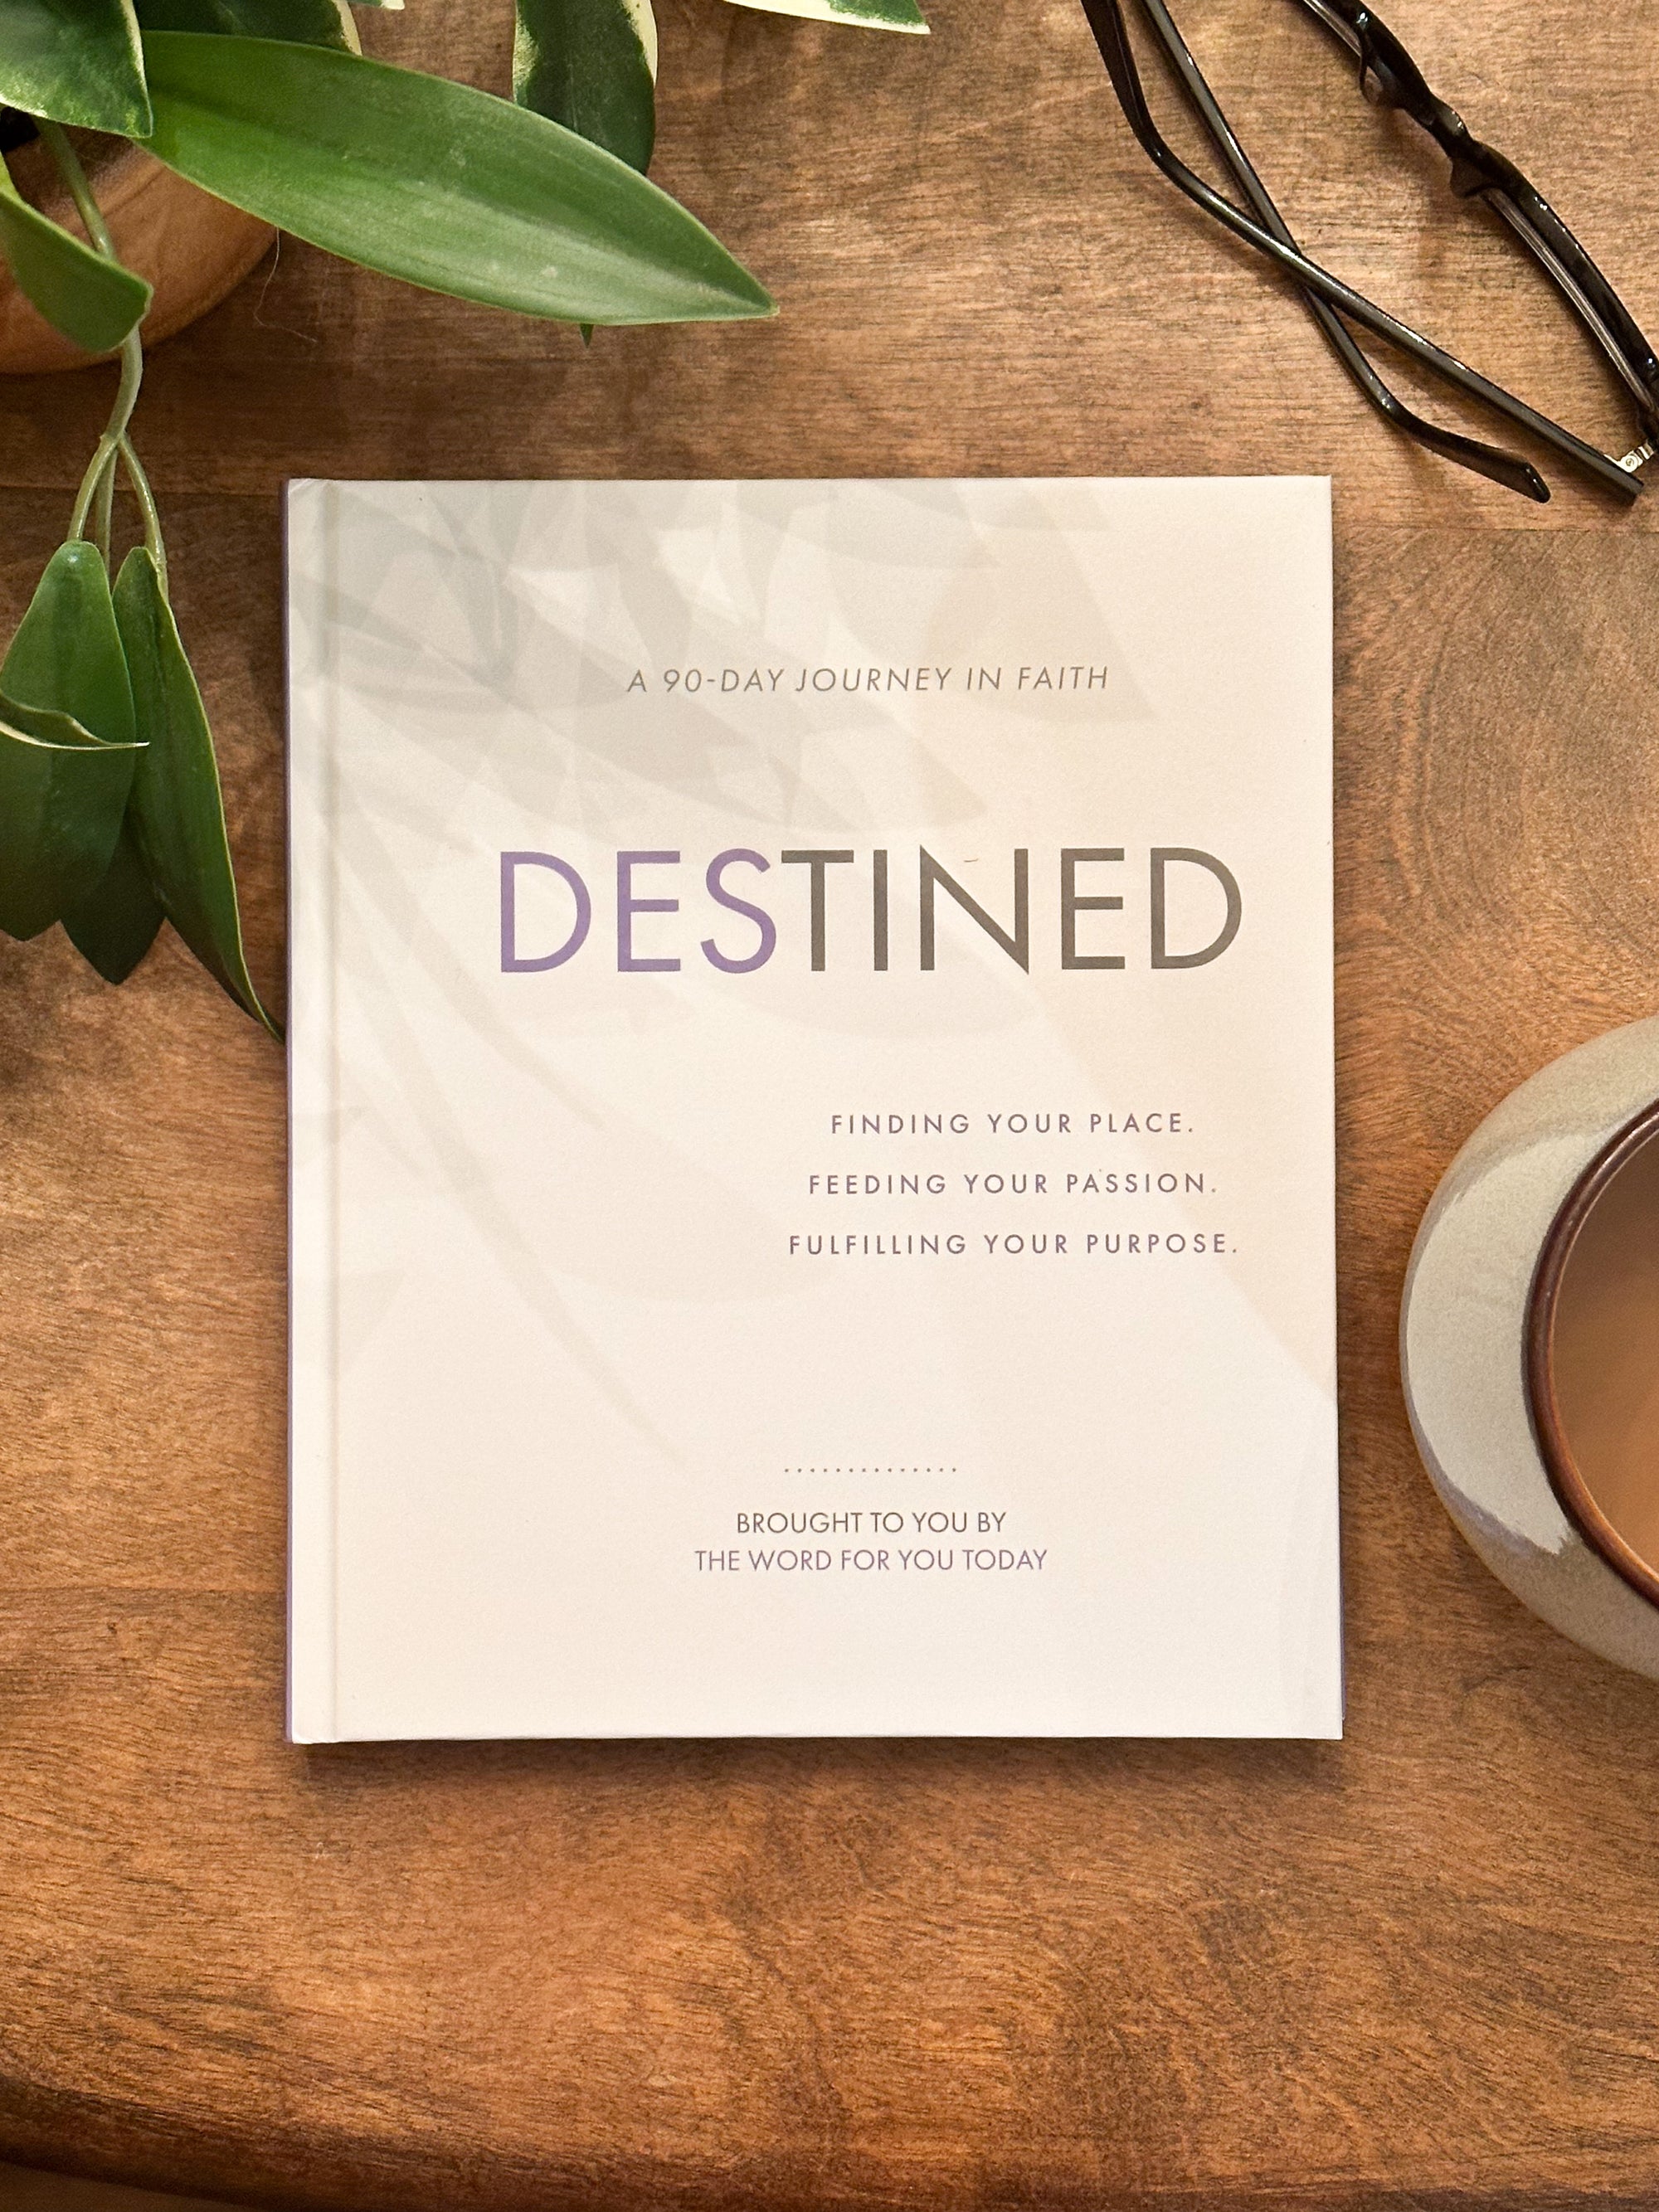 Destined: Finding Your Place. Feeding Your Passion. Fulfilling Your Purpose.